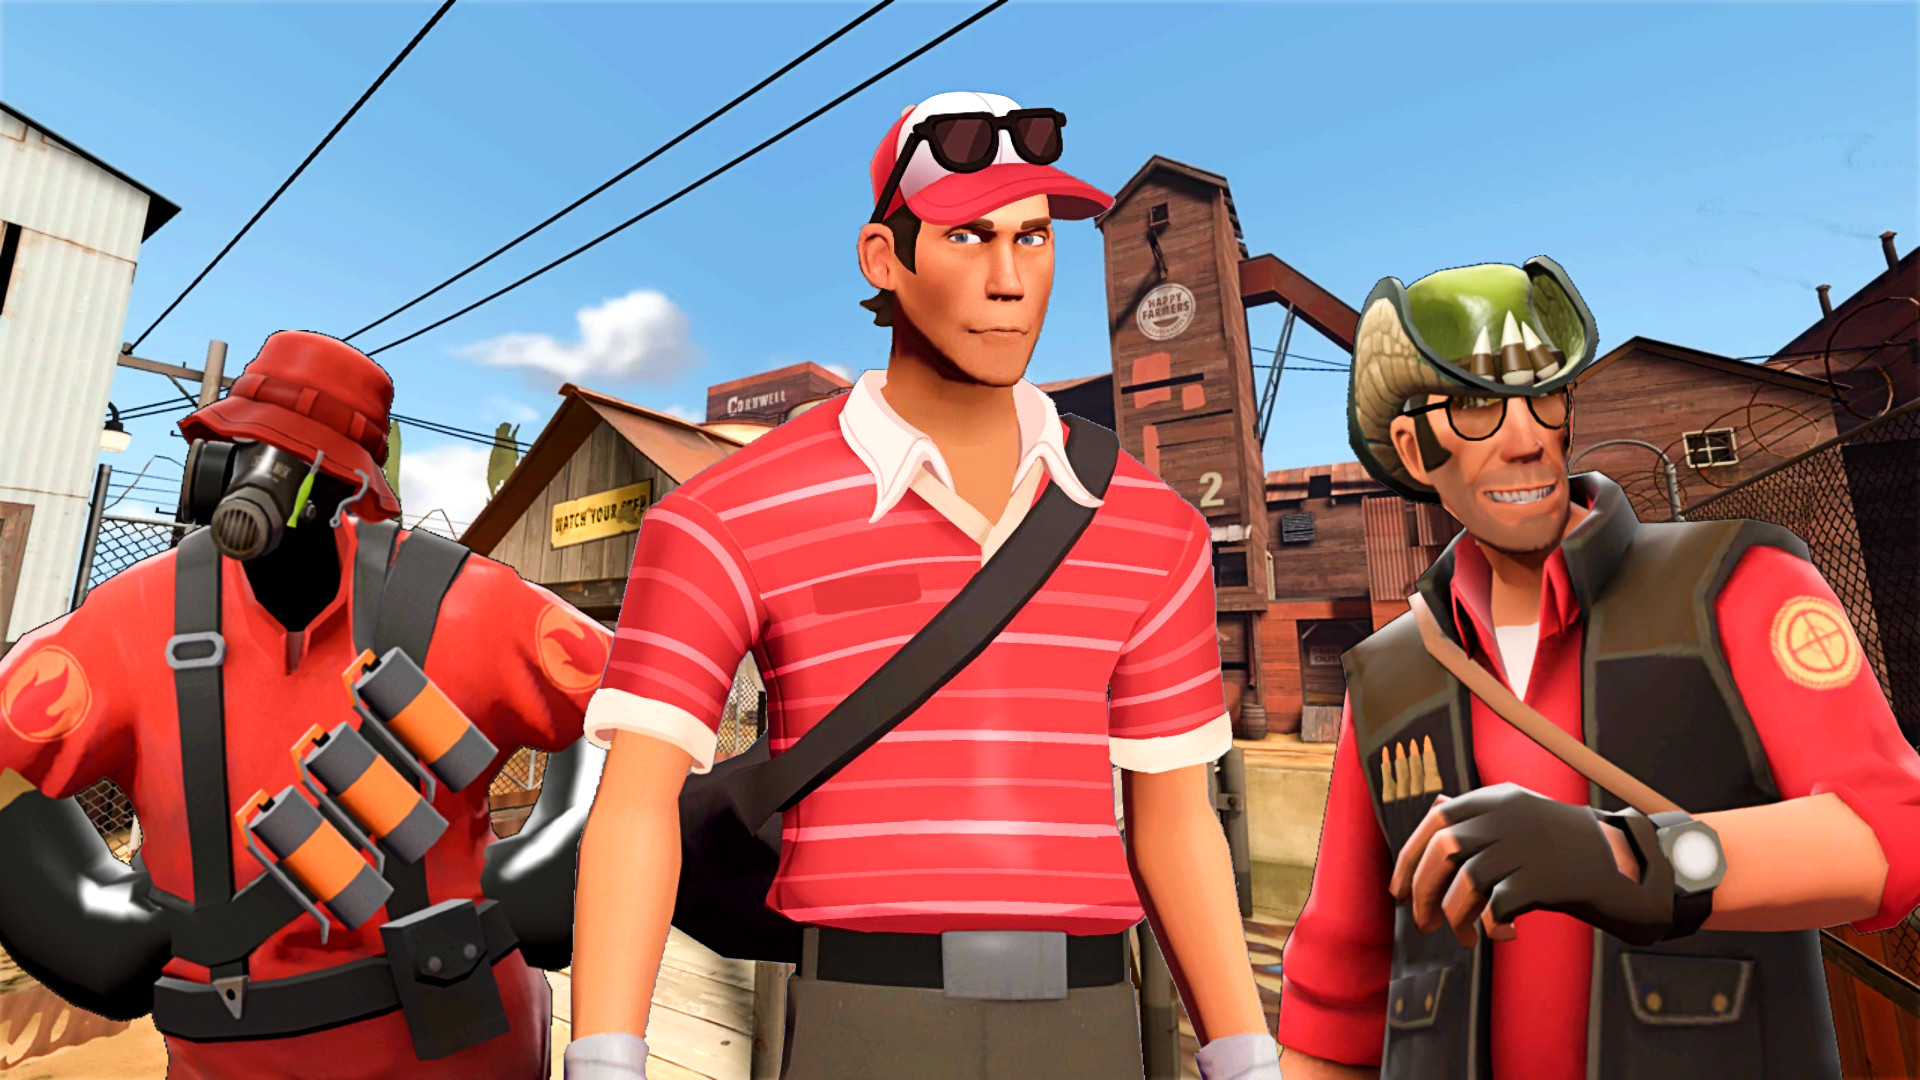 Team Fortress 2 community TF2Maps hosts charity creation jam